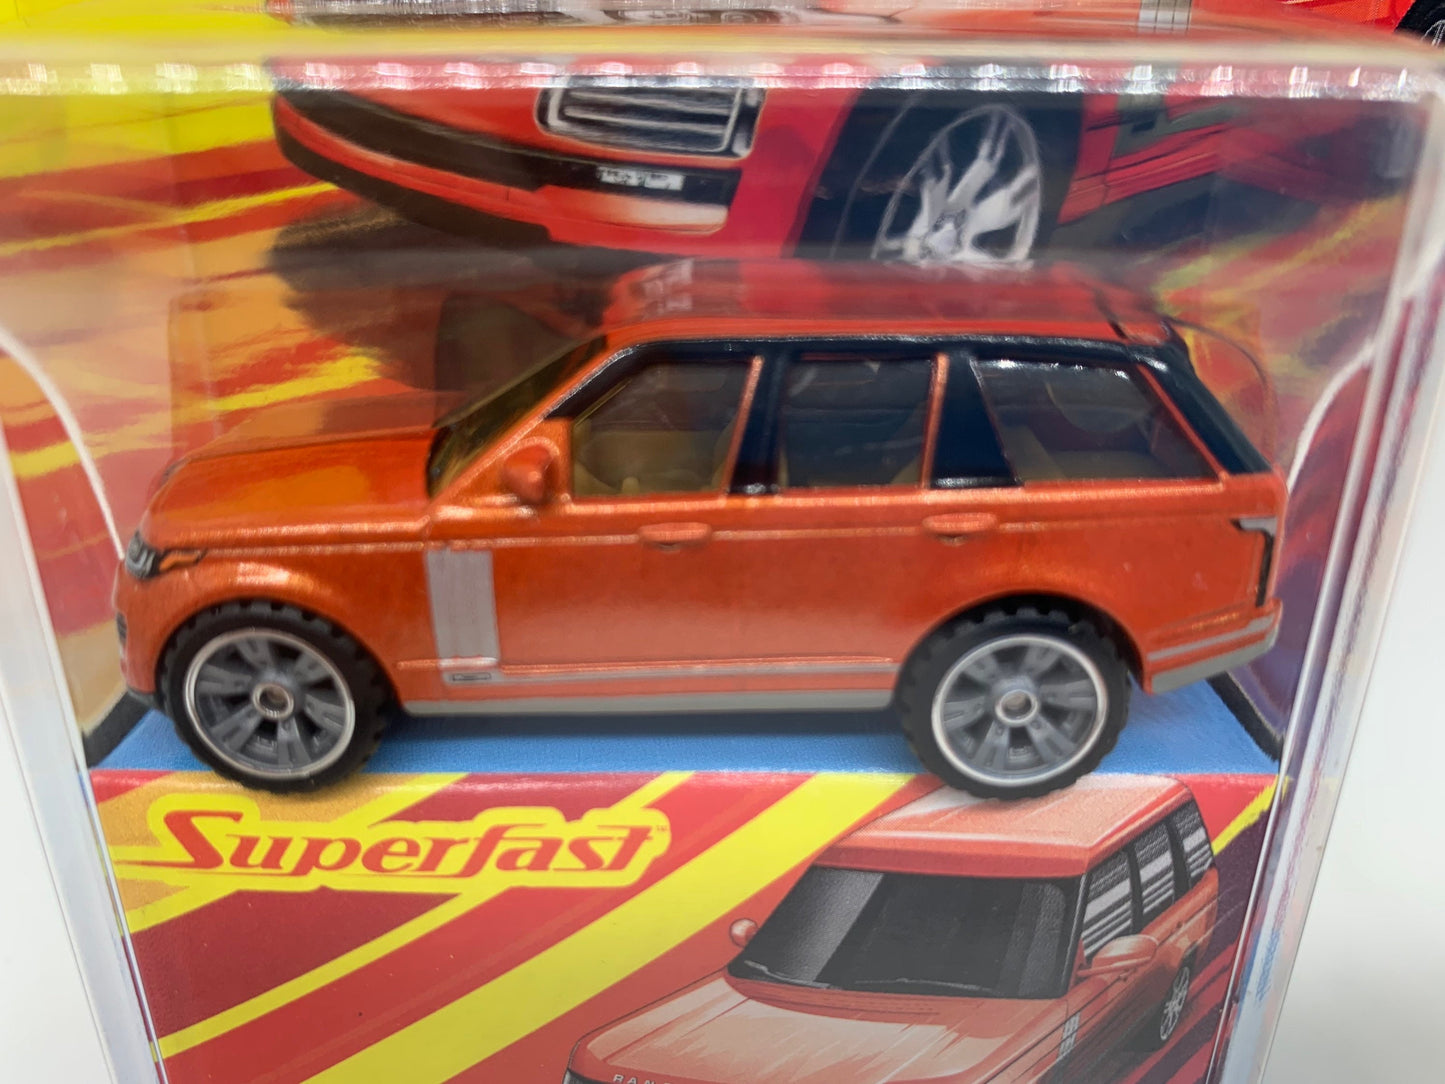 Matchbox Range Rover Vogue SE Orange Superfast Perfect Birthday Gift Miniature Collectable Model Toy Car